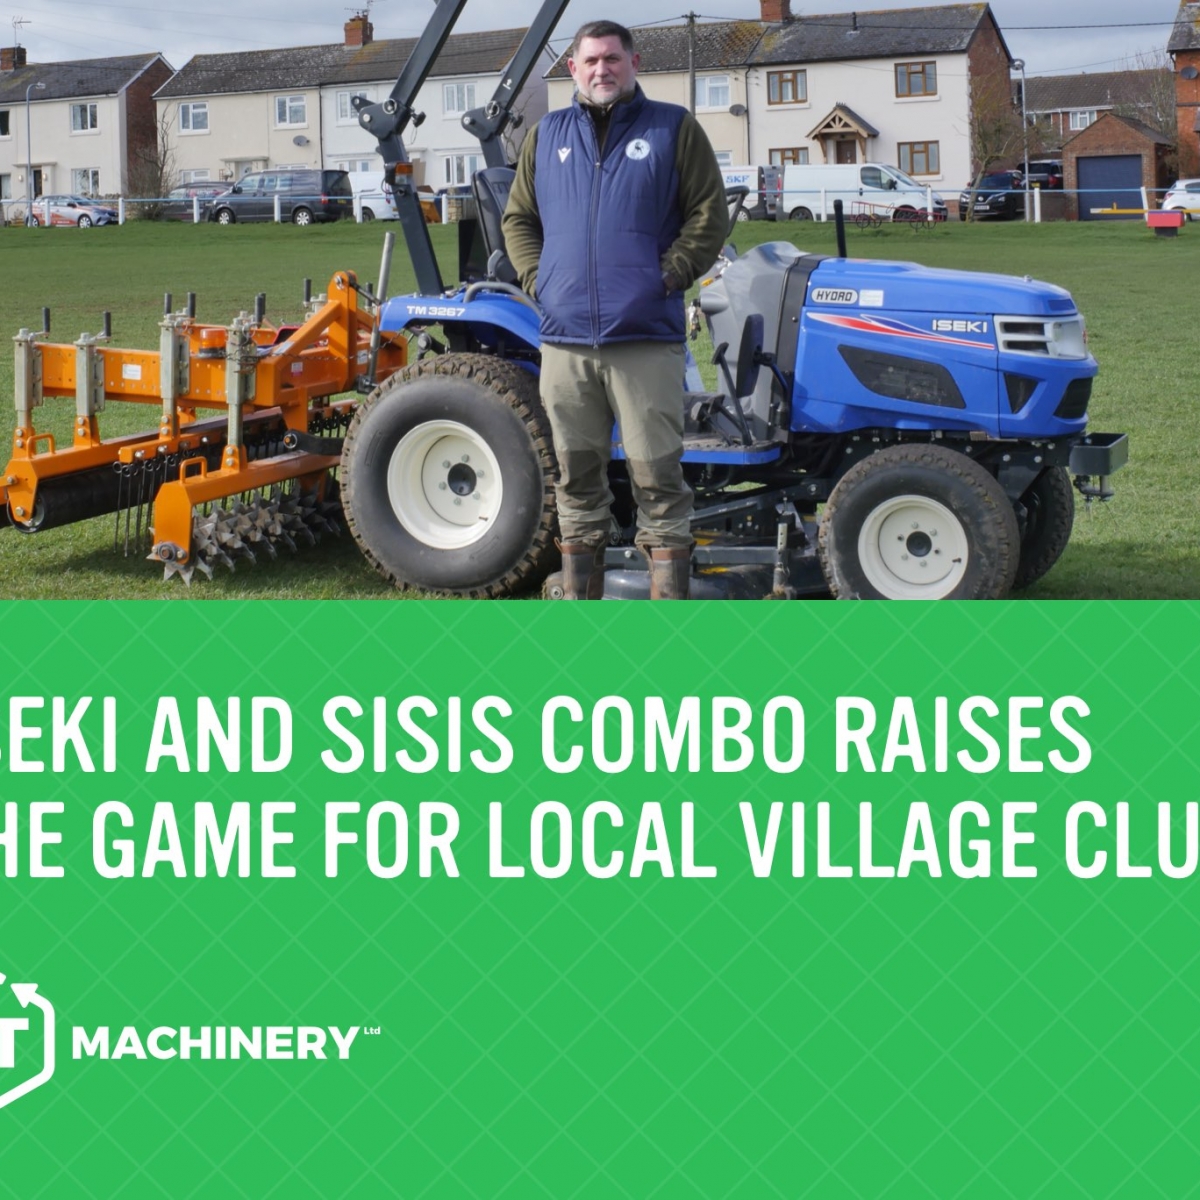 Iseki and Sisis Combo Raises the Game for Local Village Club